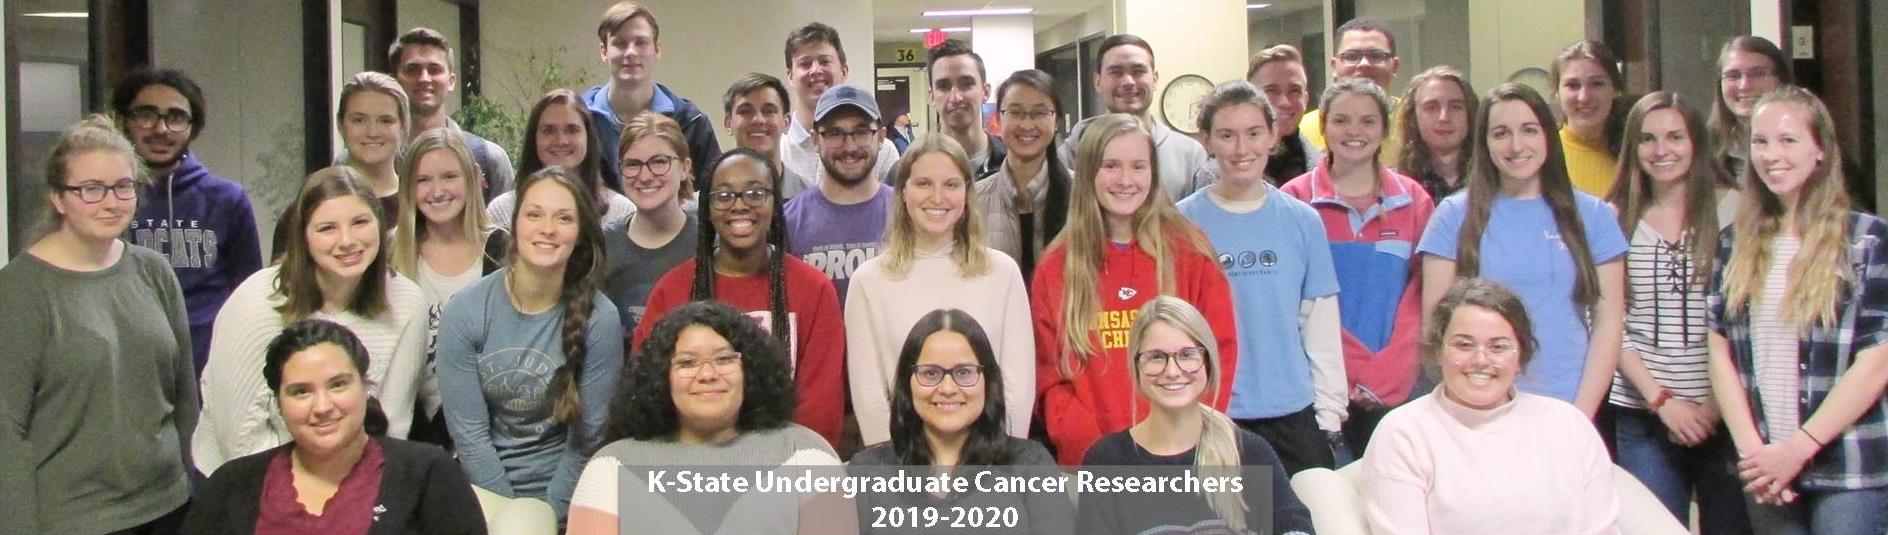 Cancer Research Awardees 2019-2020